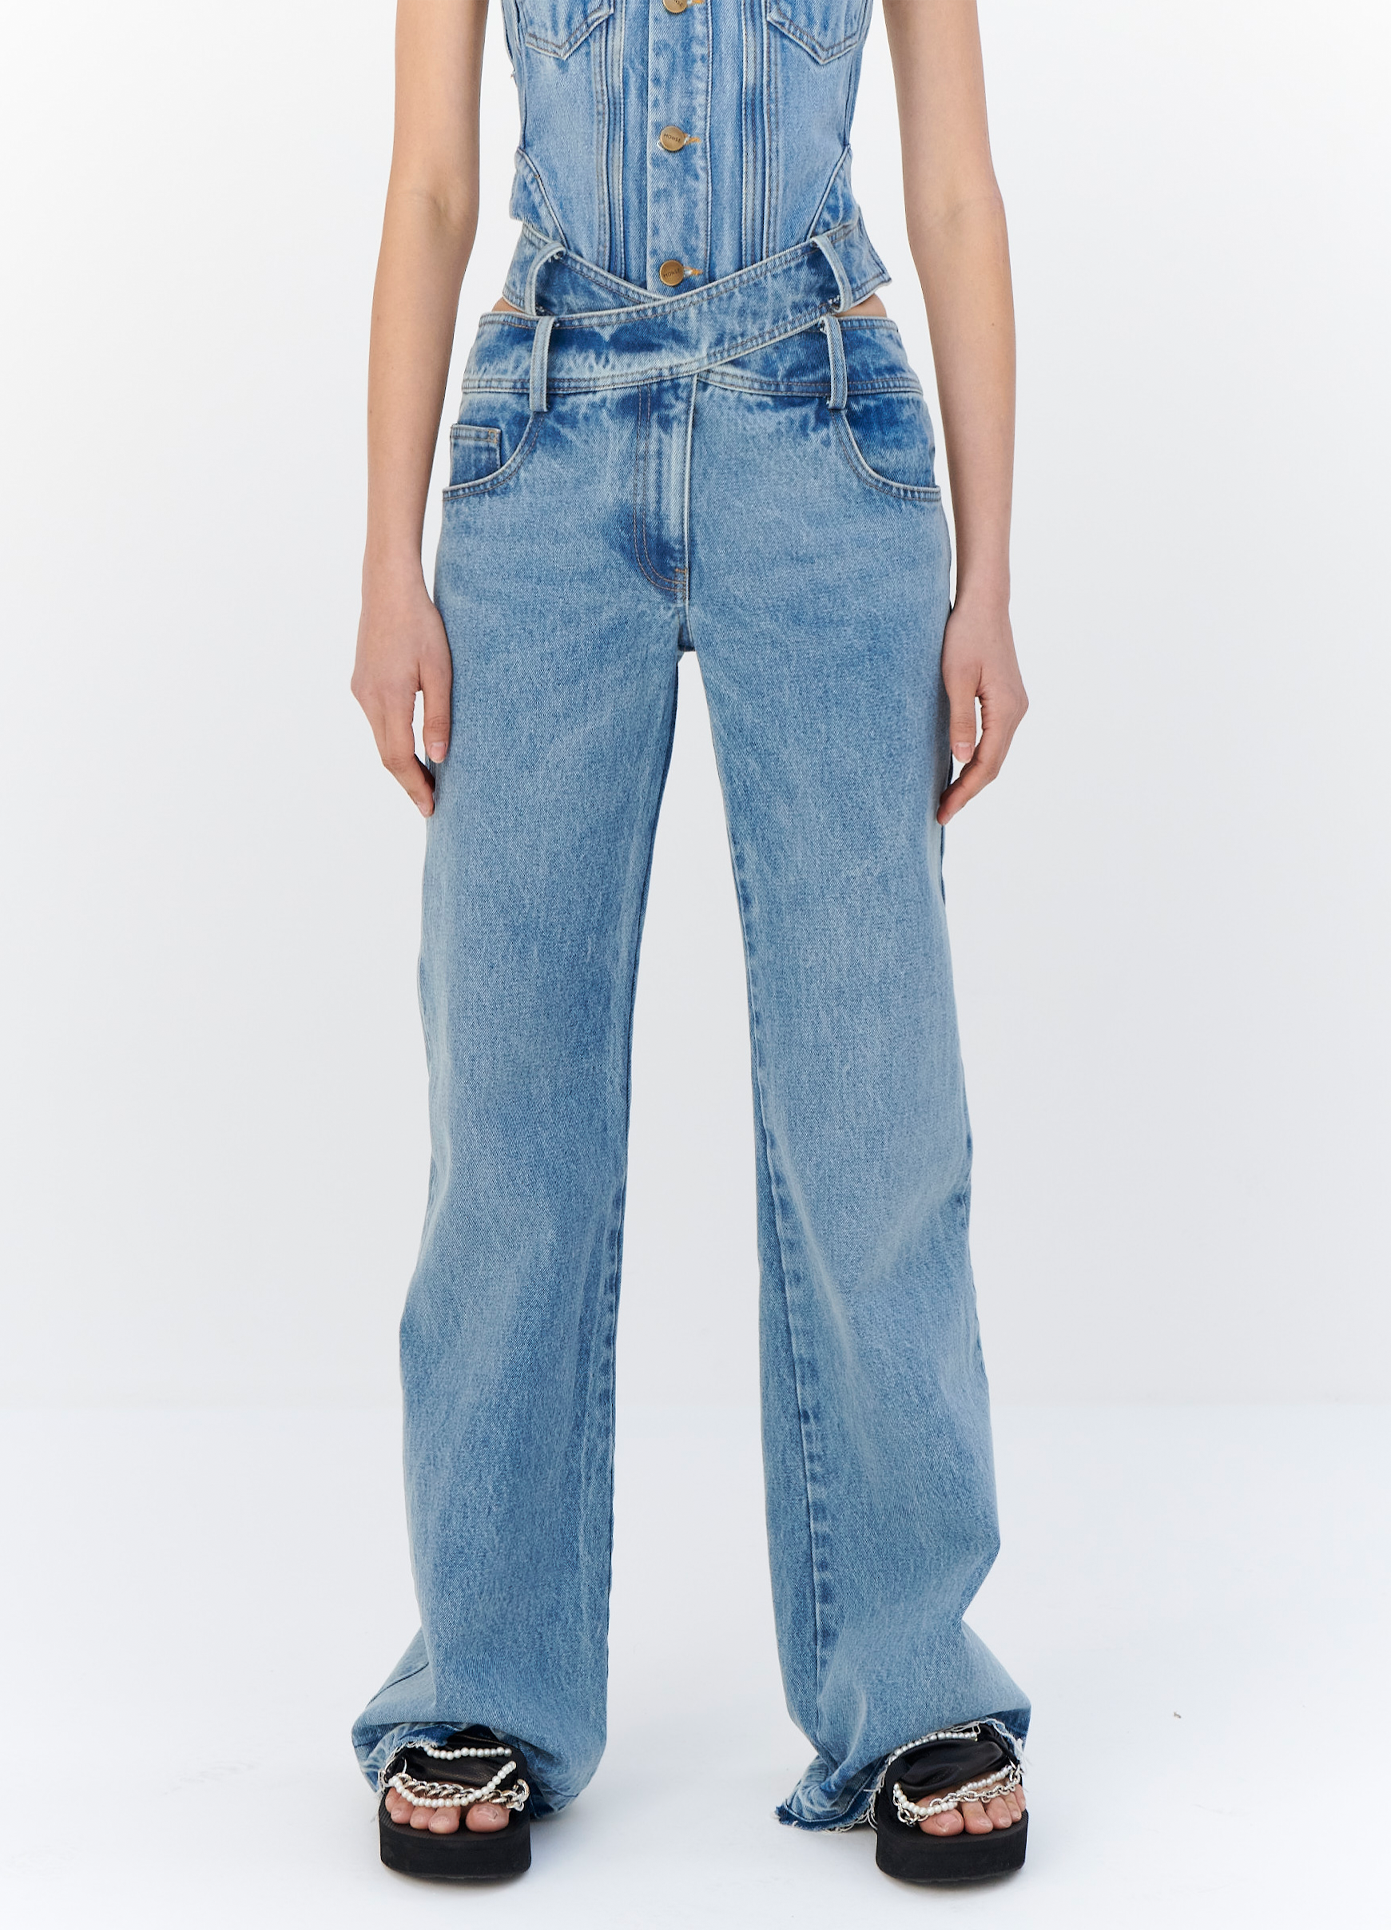 MONSE Criss Cross Waist Jeans in Indigo on model front detail view